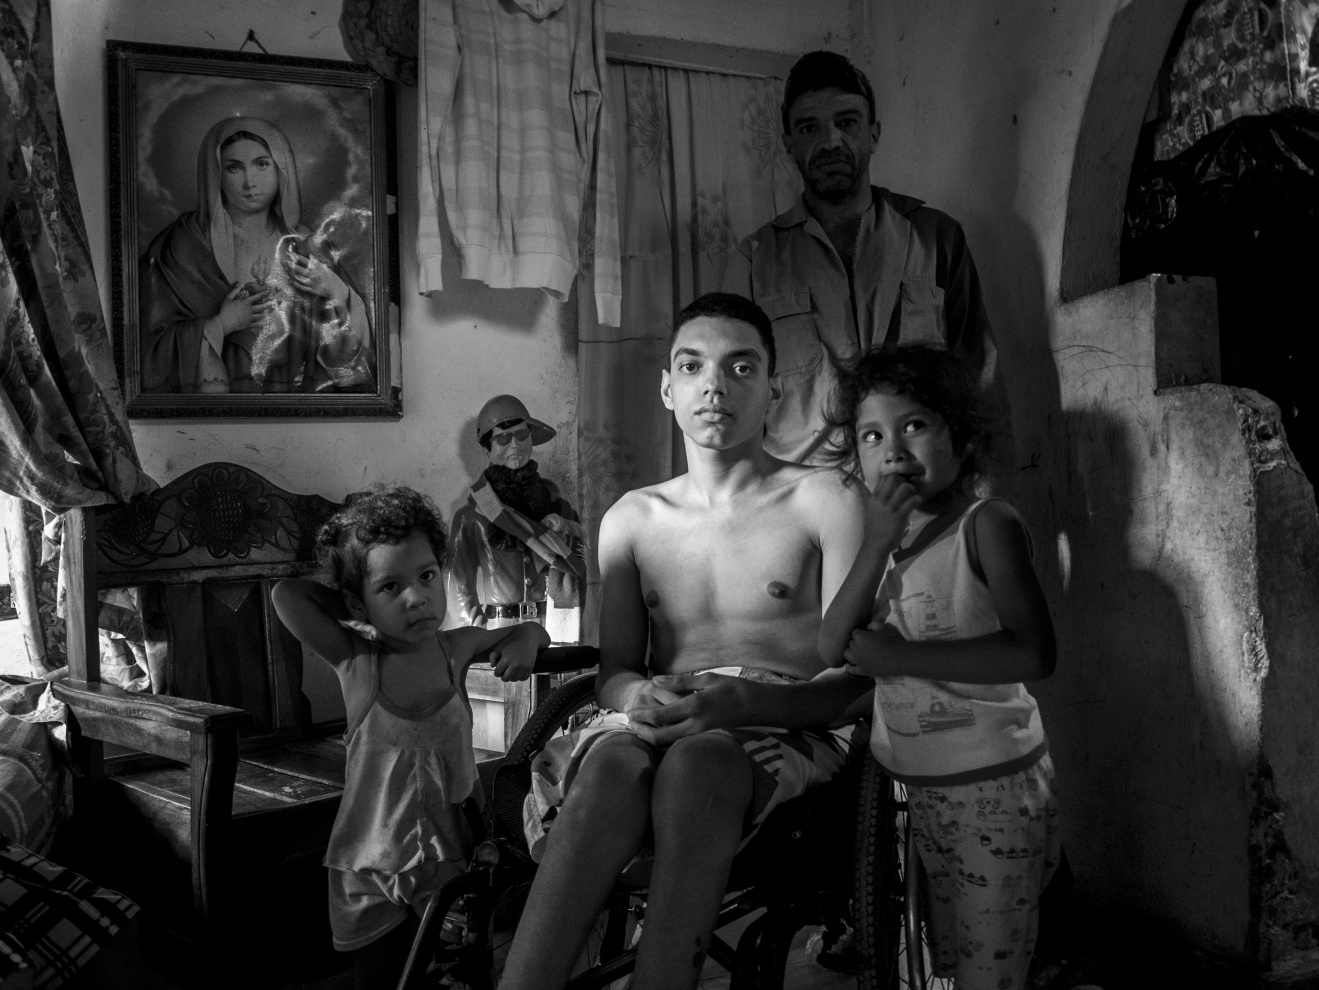 Venezuela; Miranda; Petare; 2015

A family portrayed in their own home. The young boy,  injured by a gun shot sits on a wheelchair. Petare, one of South America’s largest slums, is located just outside Caracas, Venezuela’s capital city. During the night, the city becomes what is considered one of the most dangerous areas of Venezuela, counting the highest number of homicides per year.